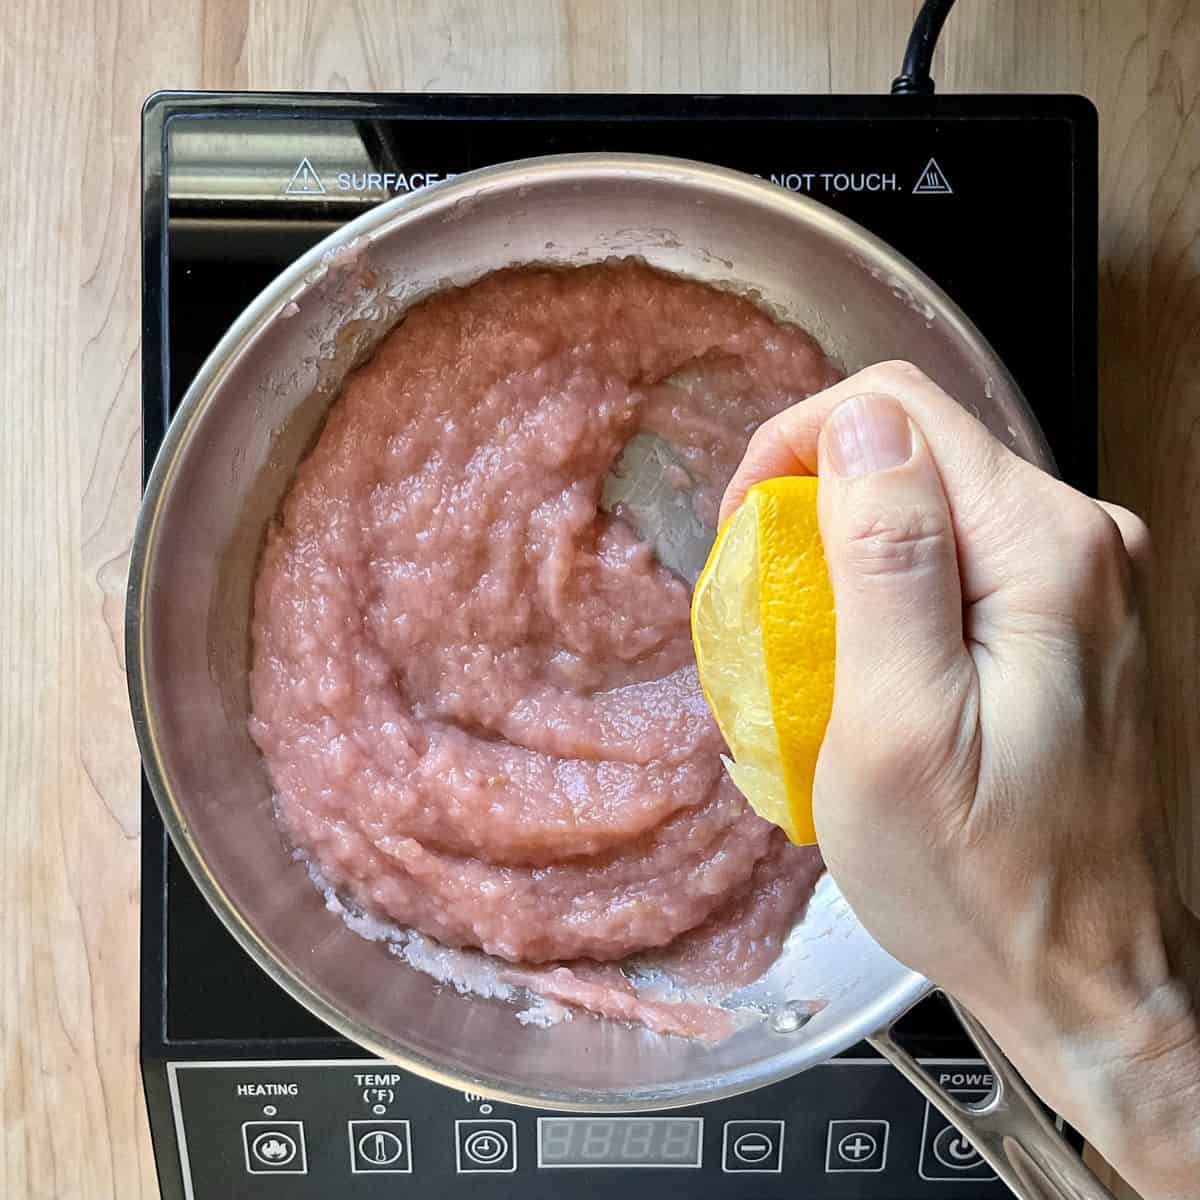 Lemon juice being added to apple butter in a pan.